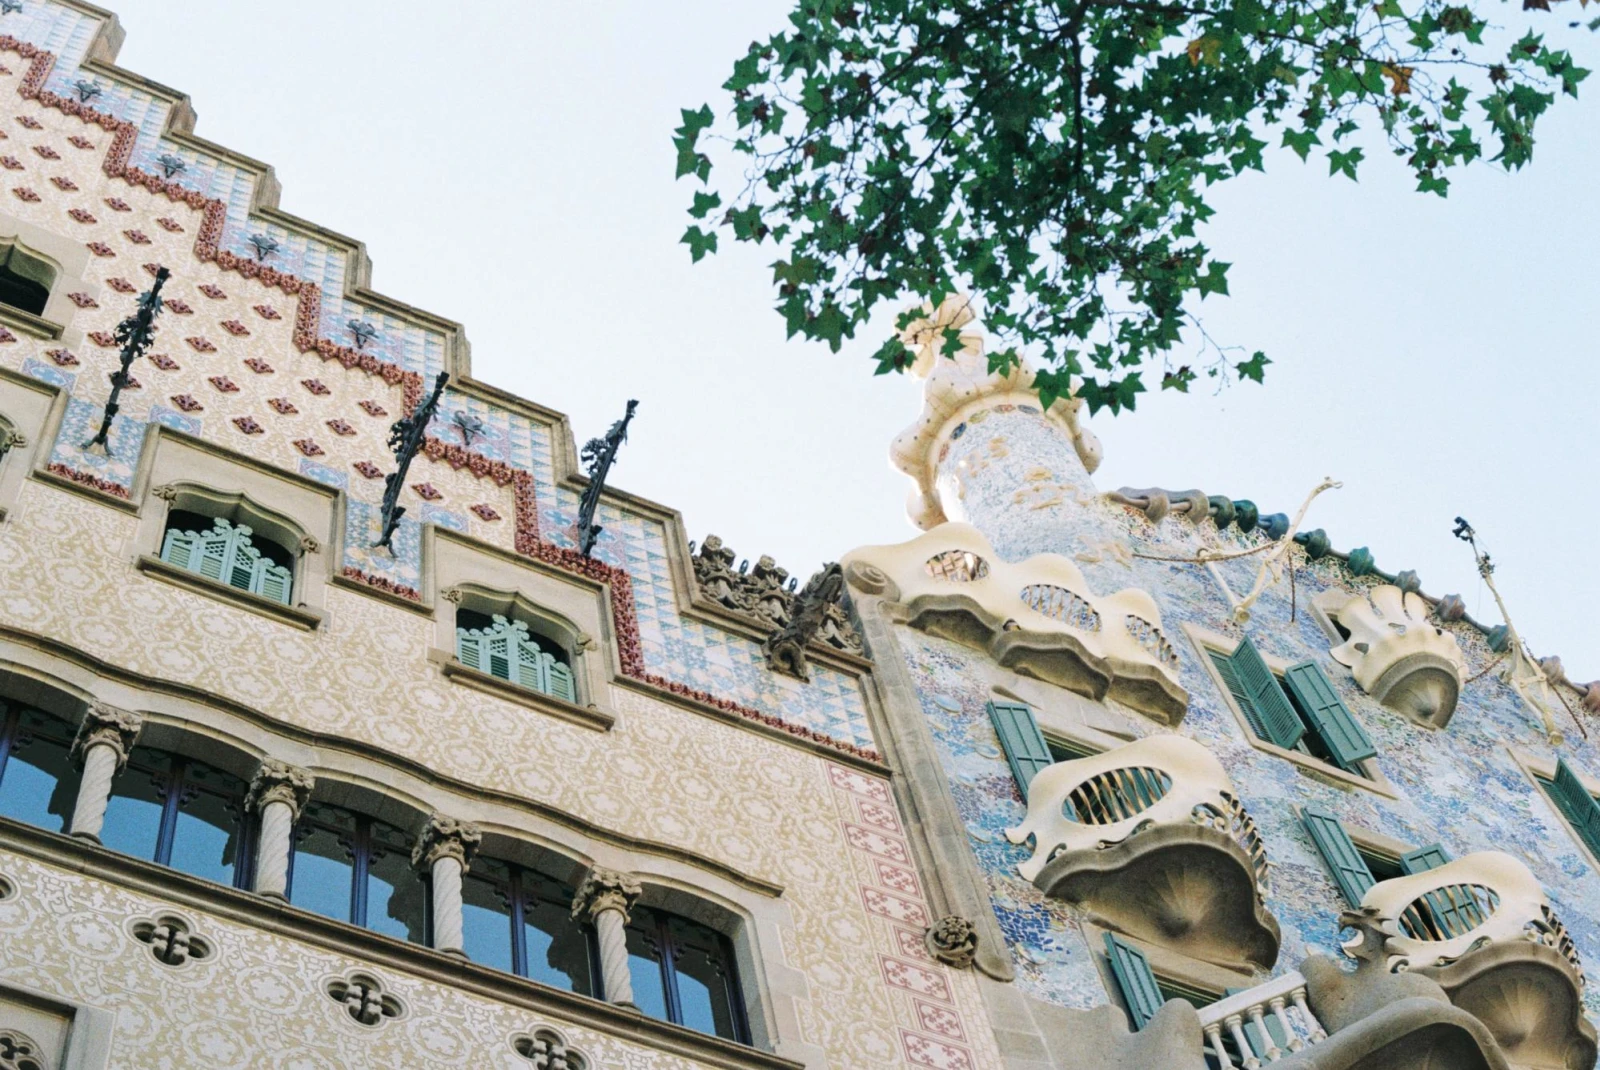 looking up an an ornate facade of a 2 buildings designed with tile and balconies 